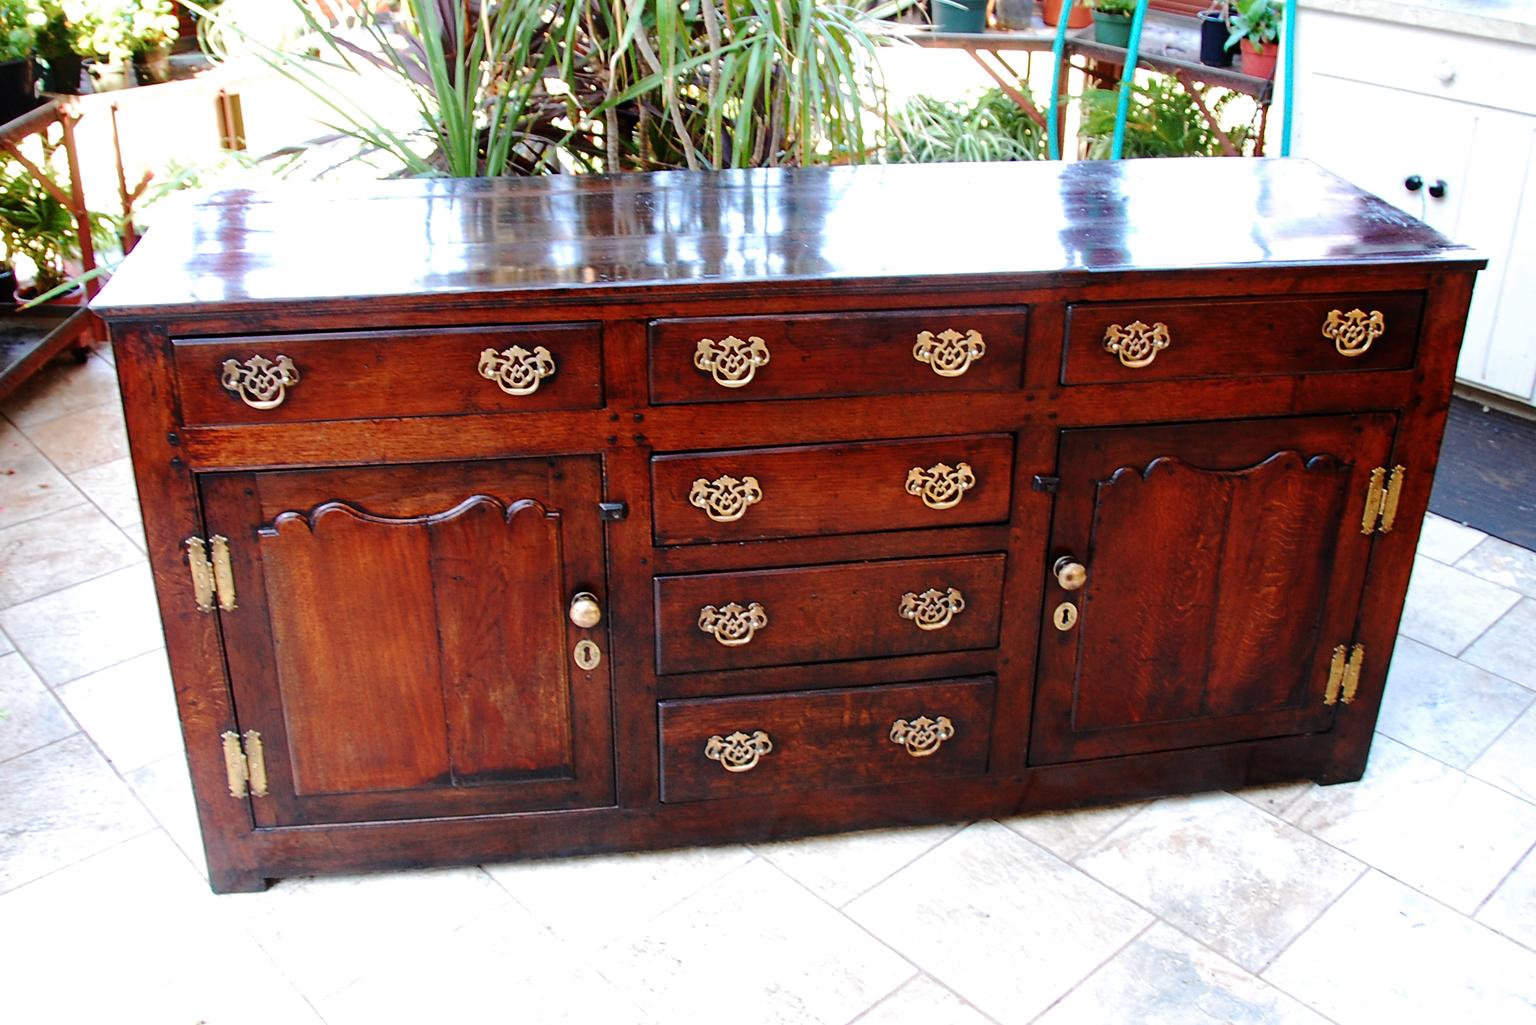 Welsh Georgian period oak low dresser from the Llanrwst region of Wales.  This low dresser has six working drawers, two paneled door cupboards, paneled ends and back.   At sixty seven inches long it provides substantial storage room and serving